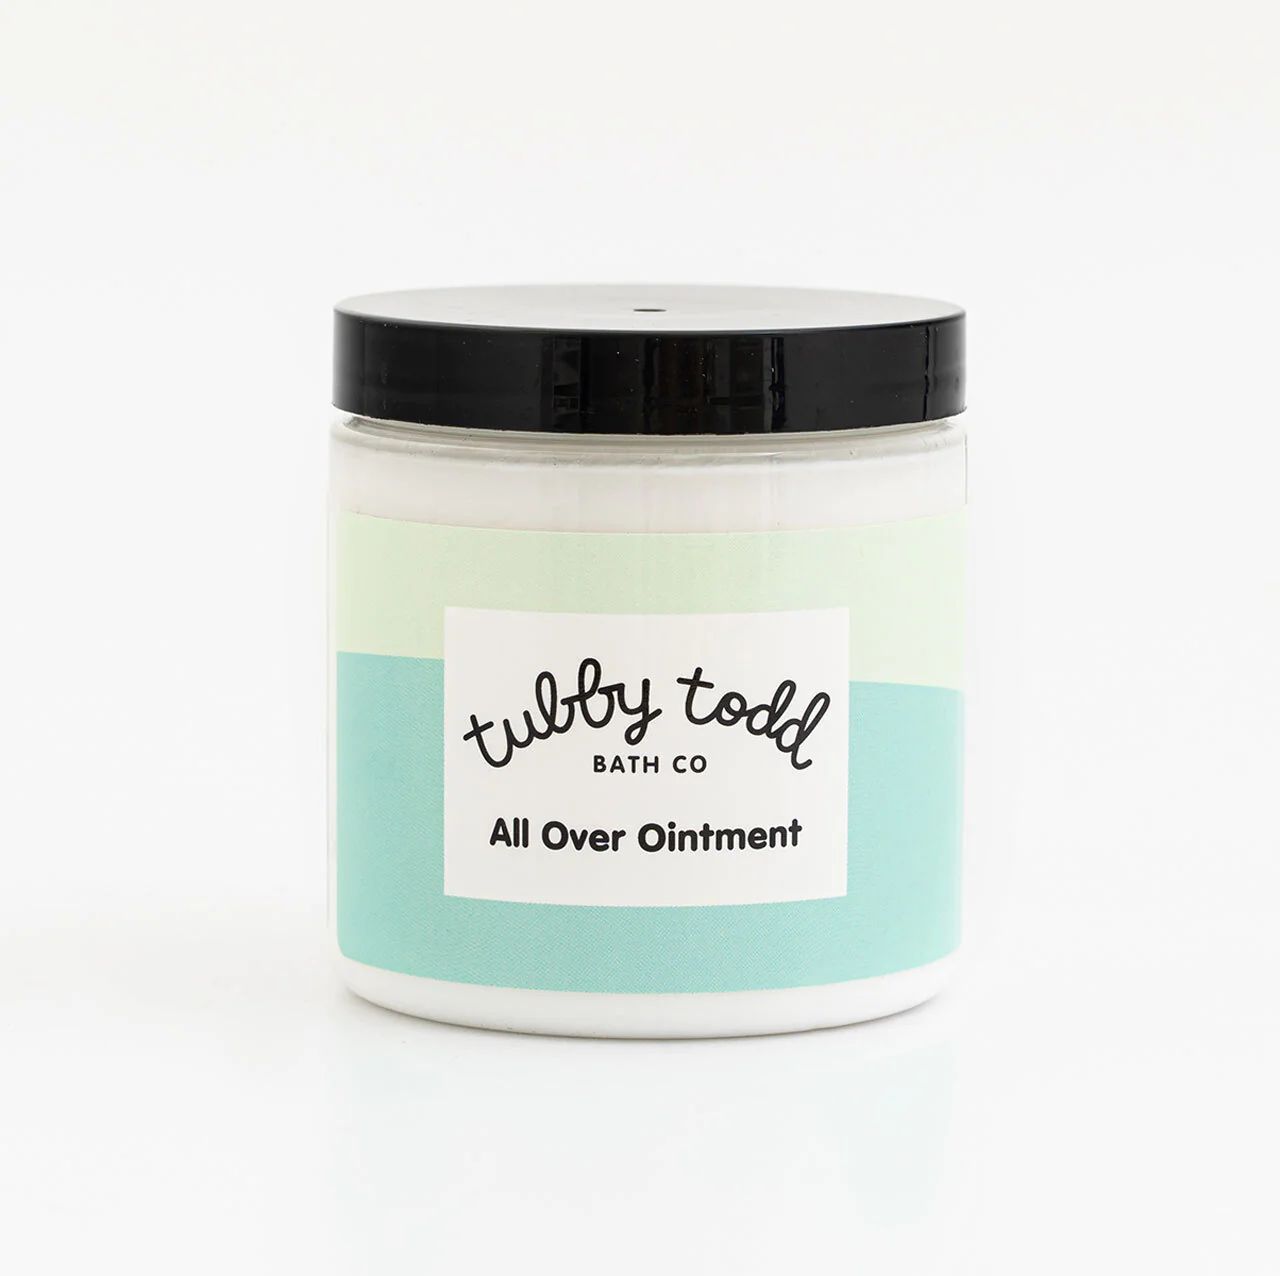 All Over Ointment Original | Tubby Todd Bath Co